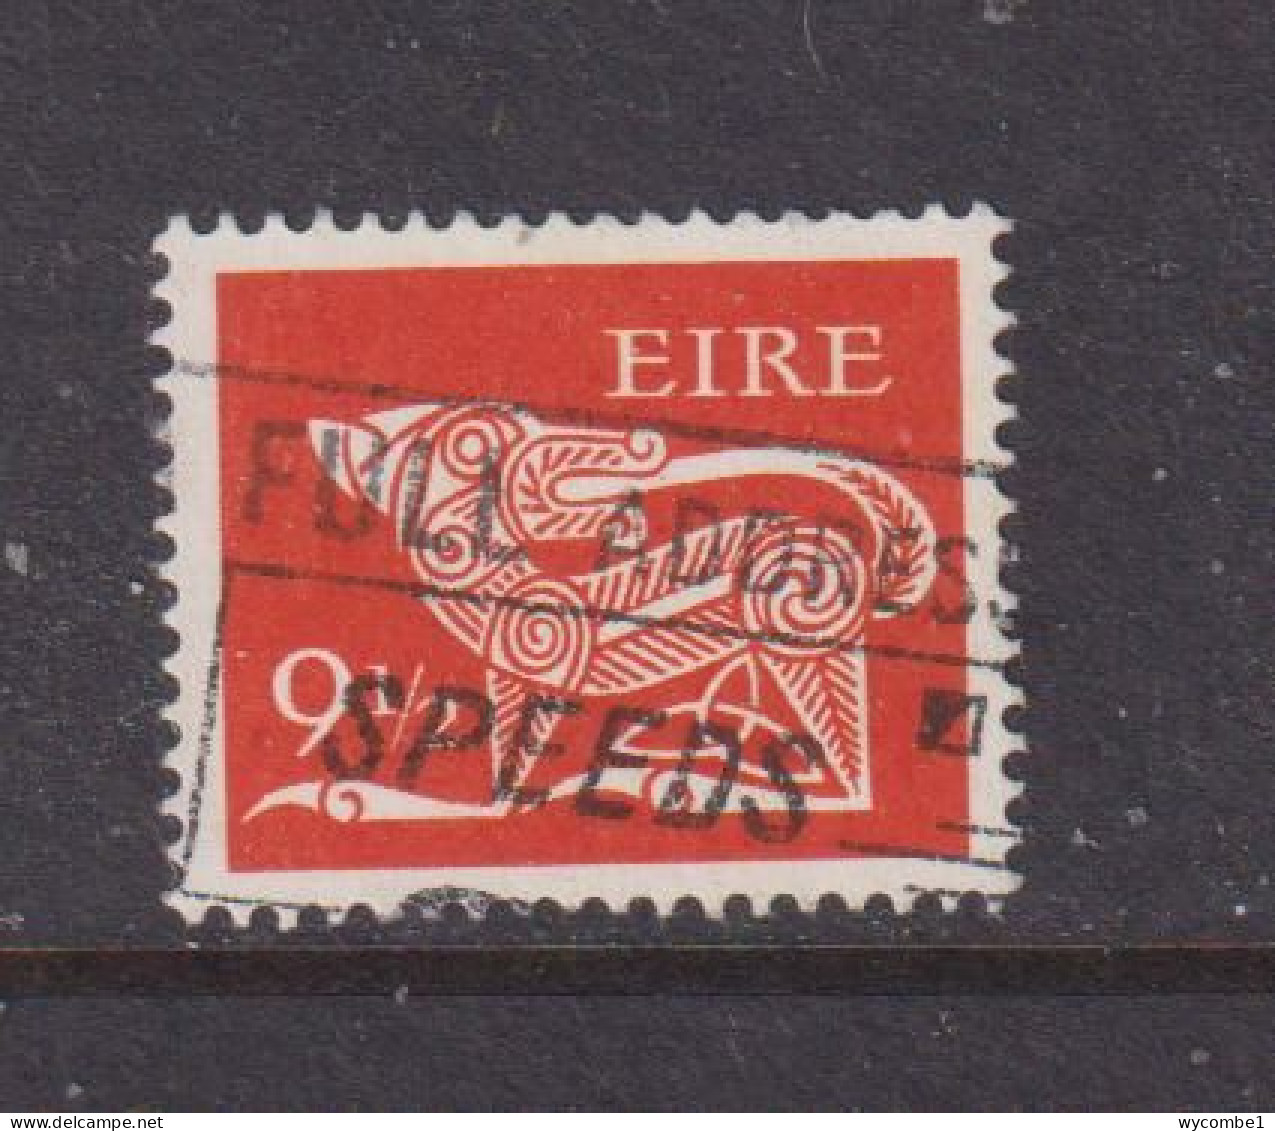 IRELAND - 1971  Decimal Currency Definitives  91/2p  Used As Scan - Gebraucht